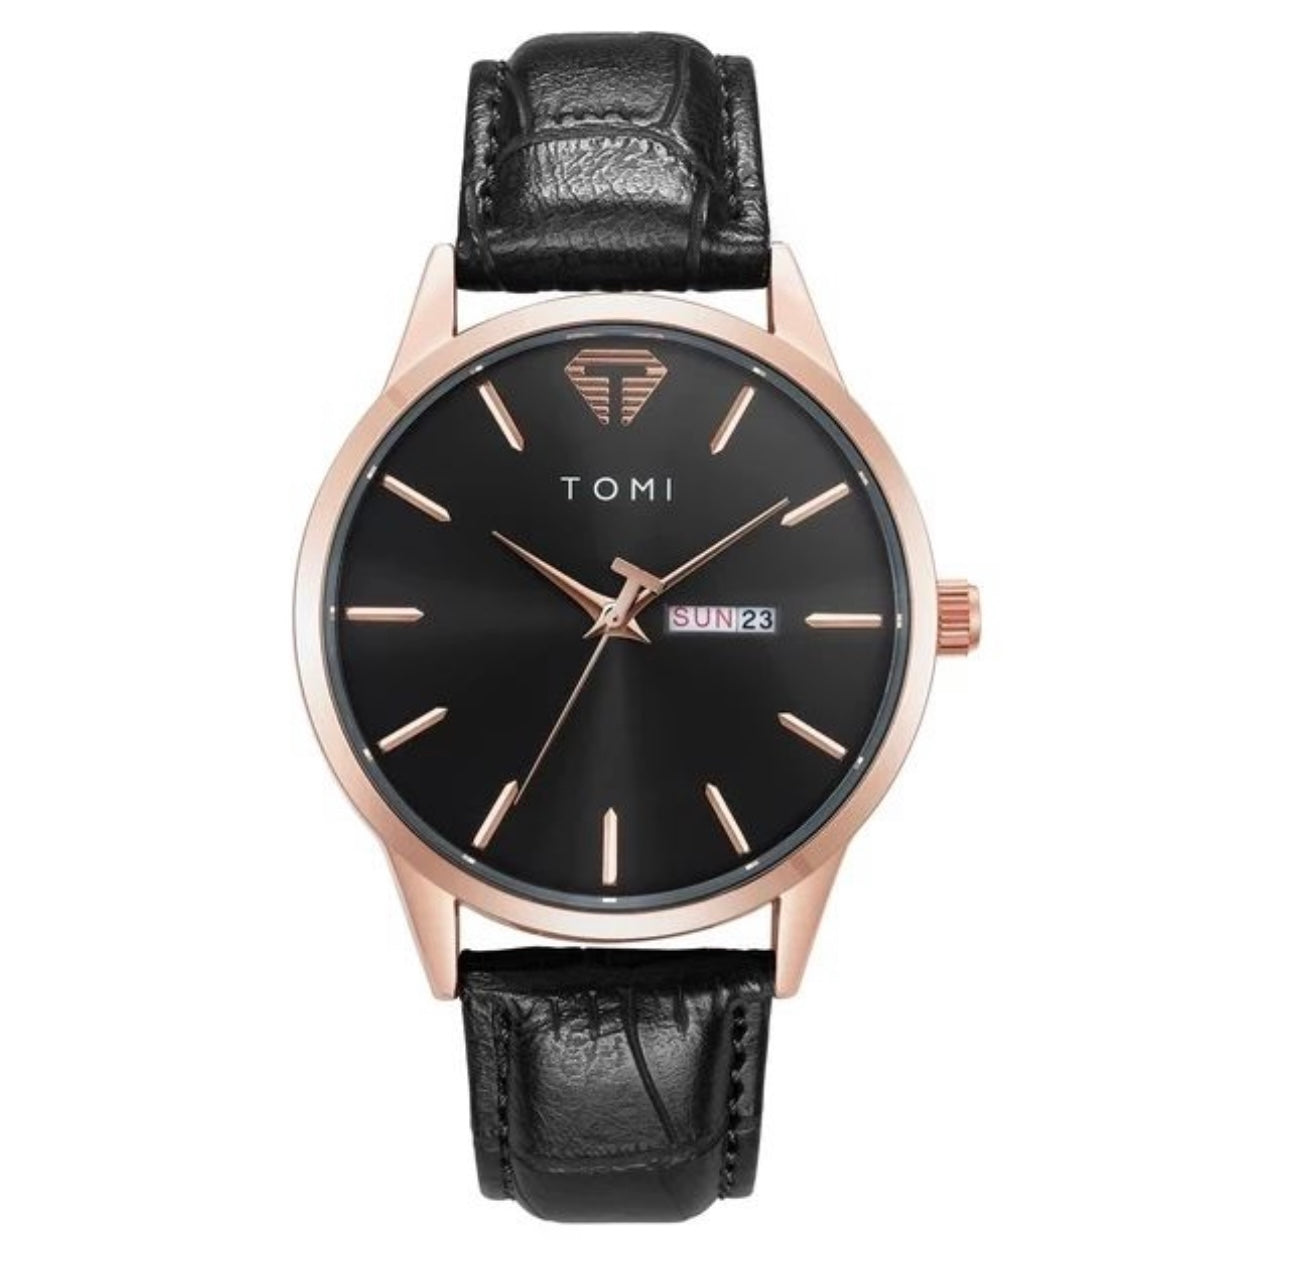 TOMI - Special Leather - Date & Day - Water Resistant